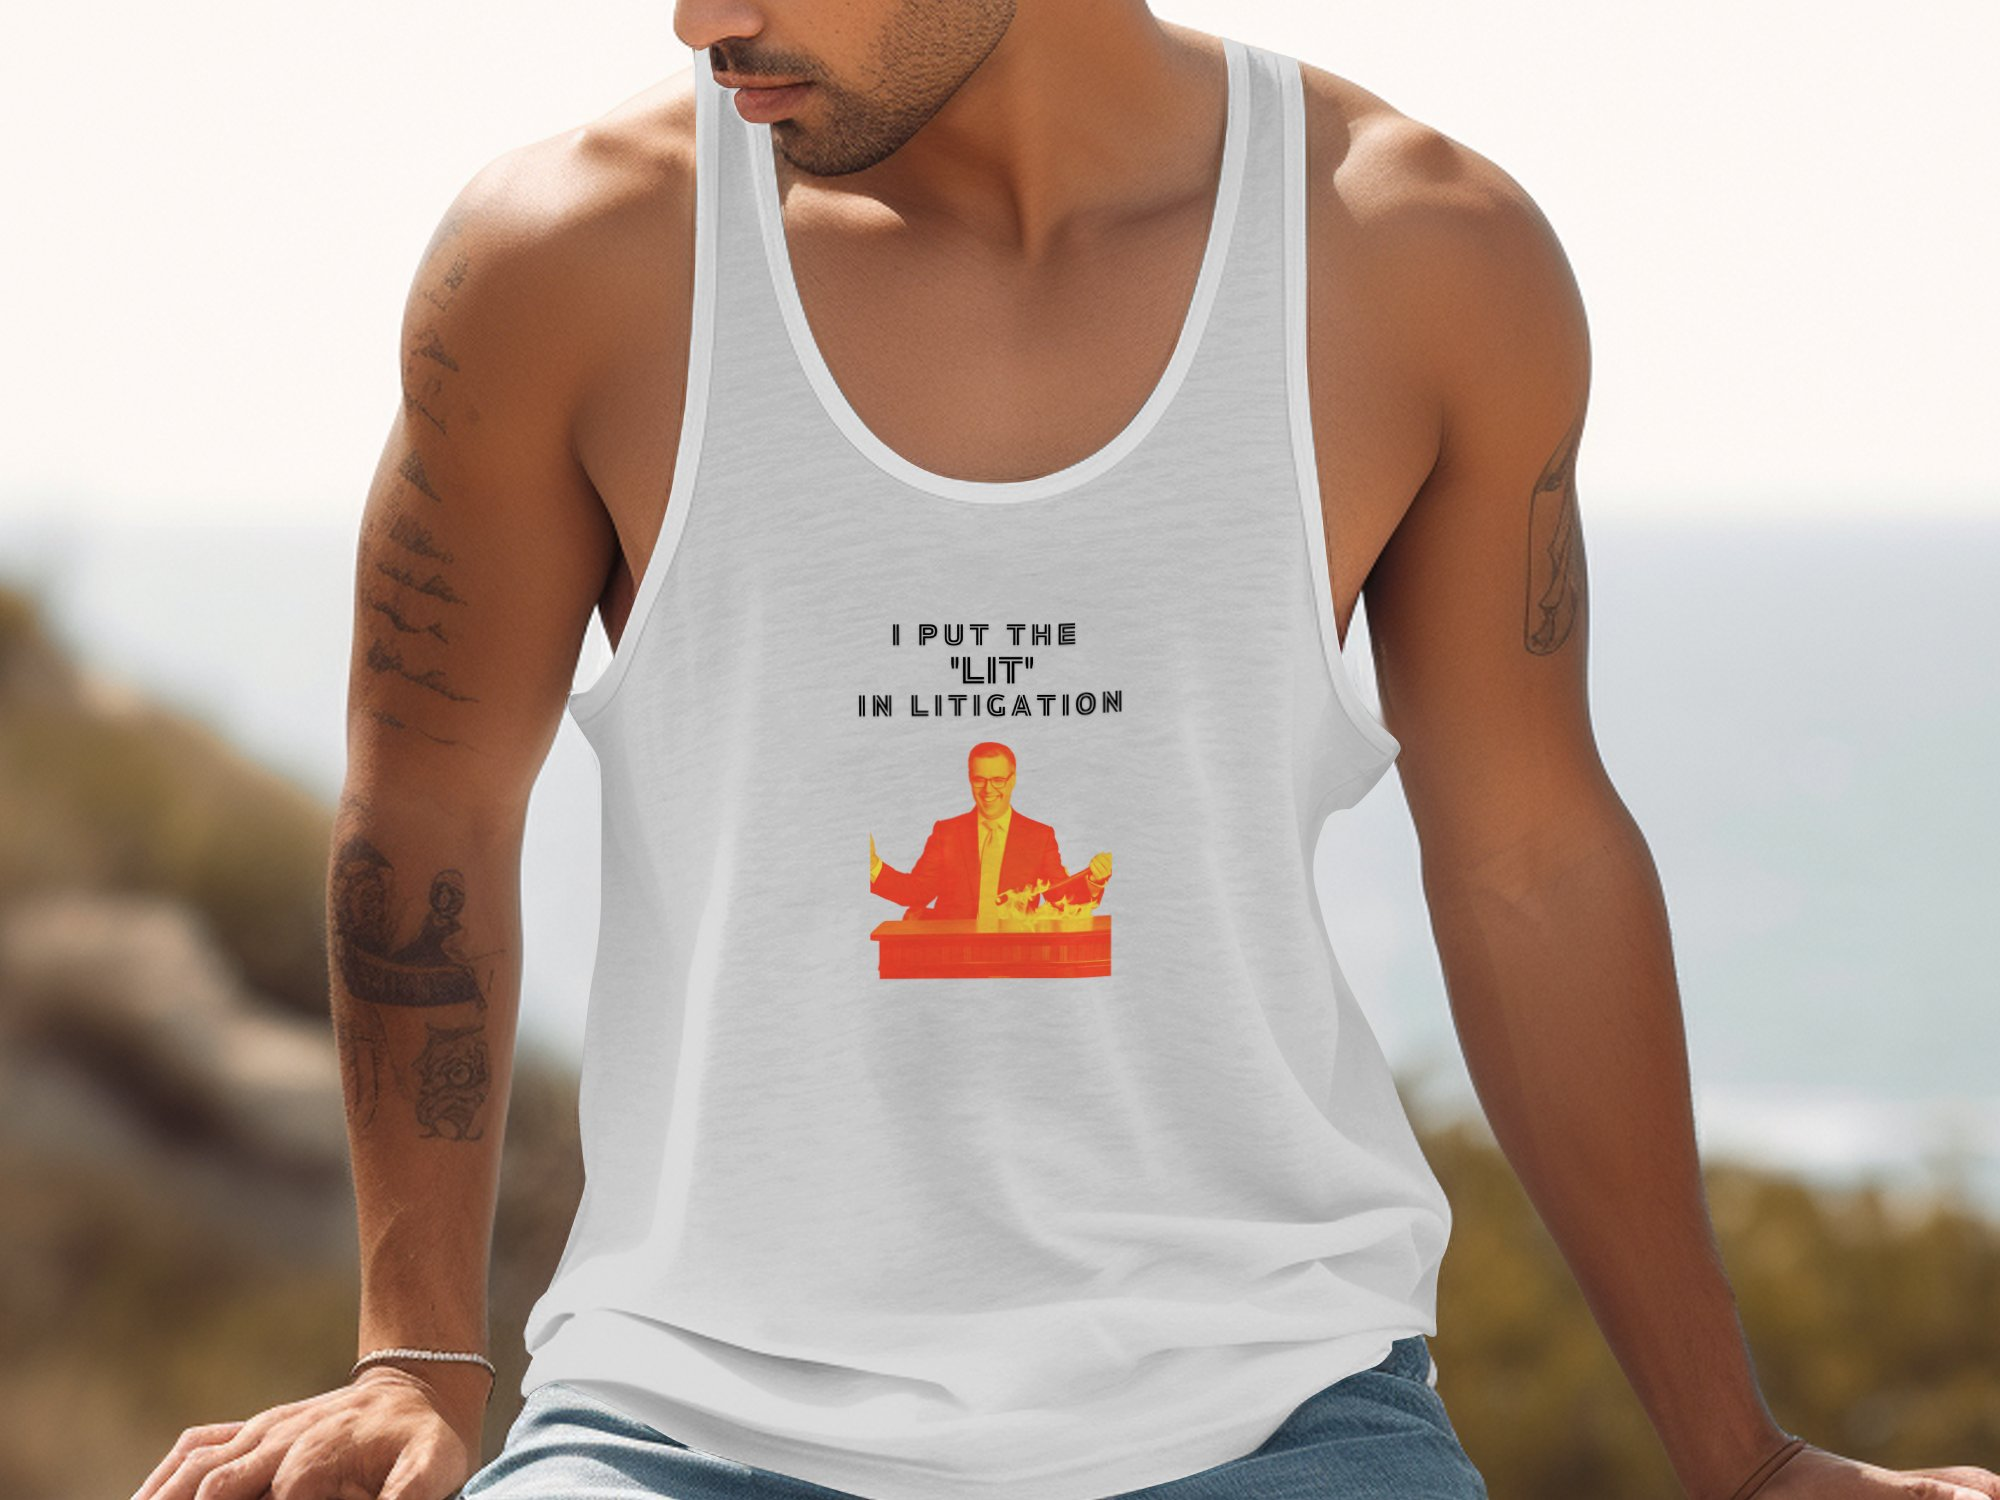 Funny, lawyer tank top